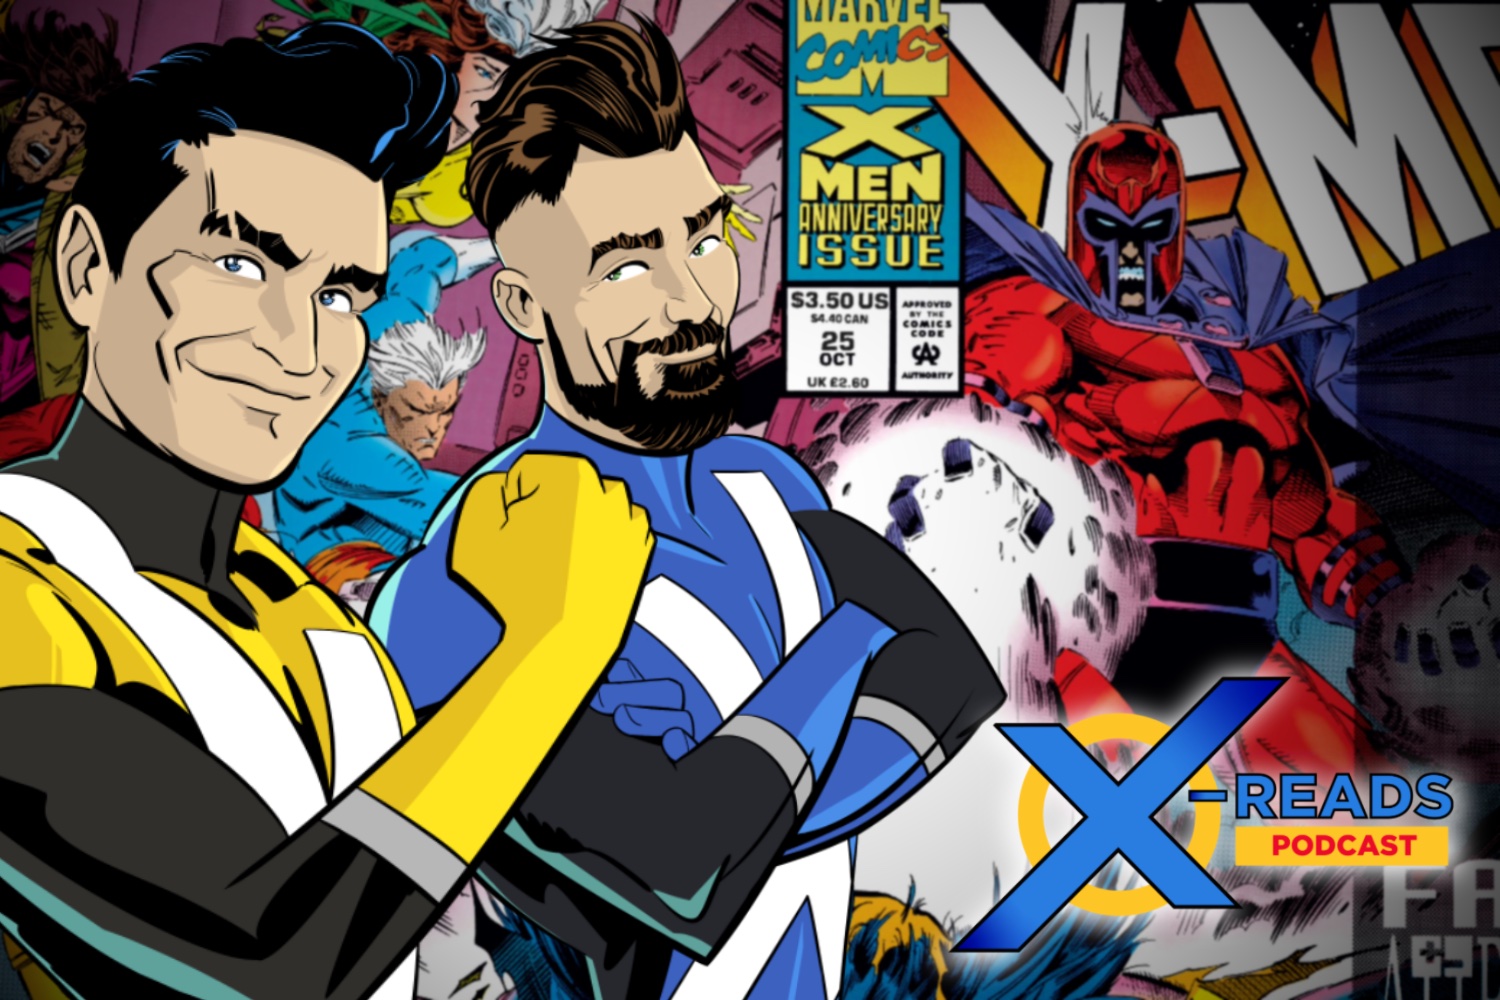 X-Reads Podcast Episode 90: Top 10 Episodes of 2022